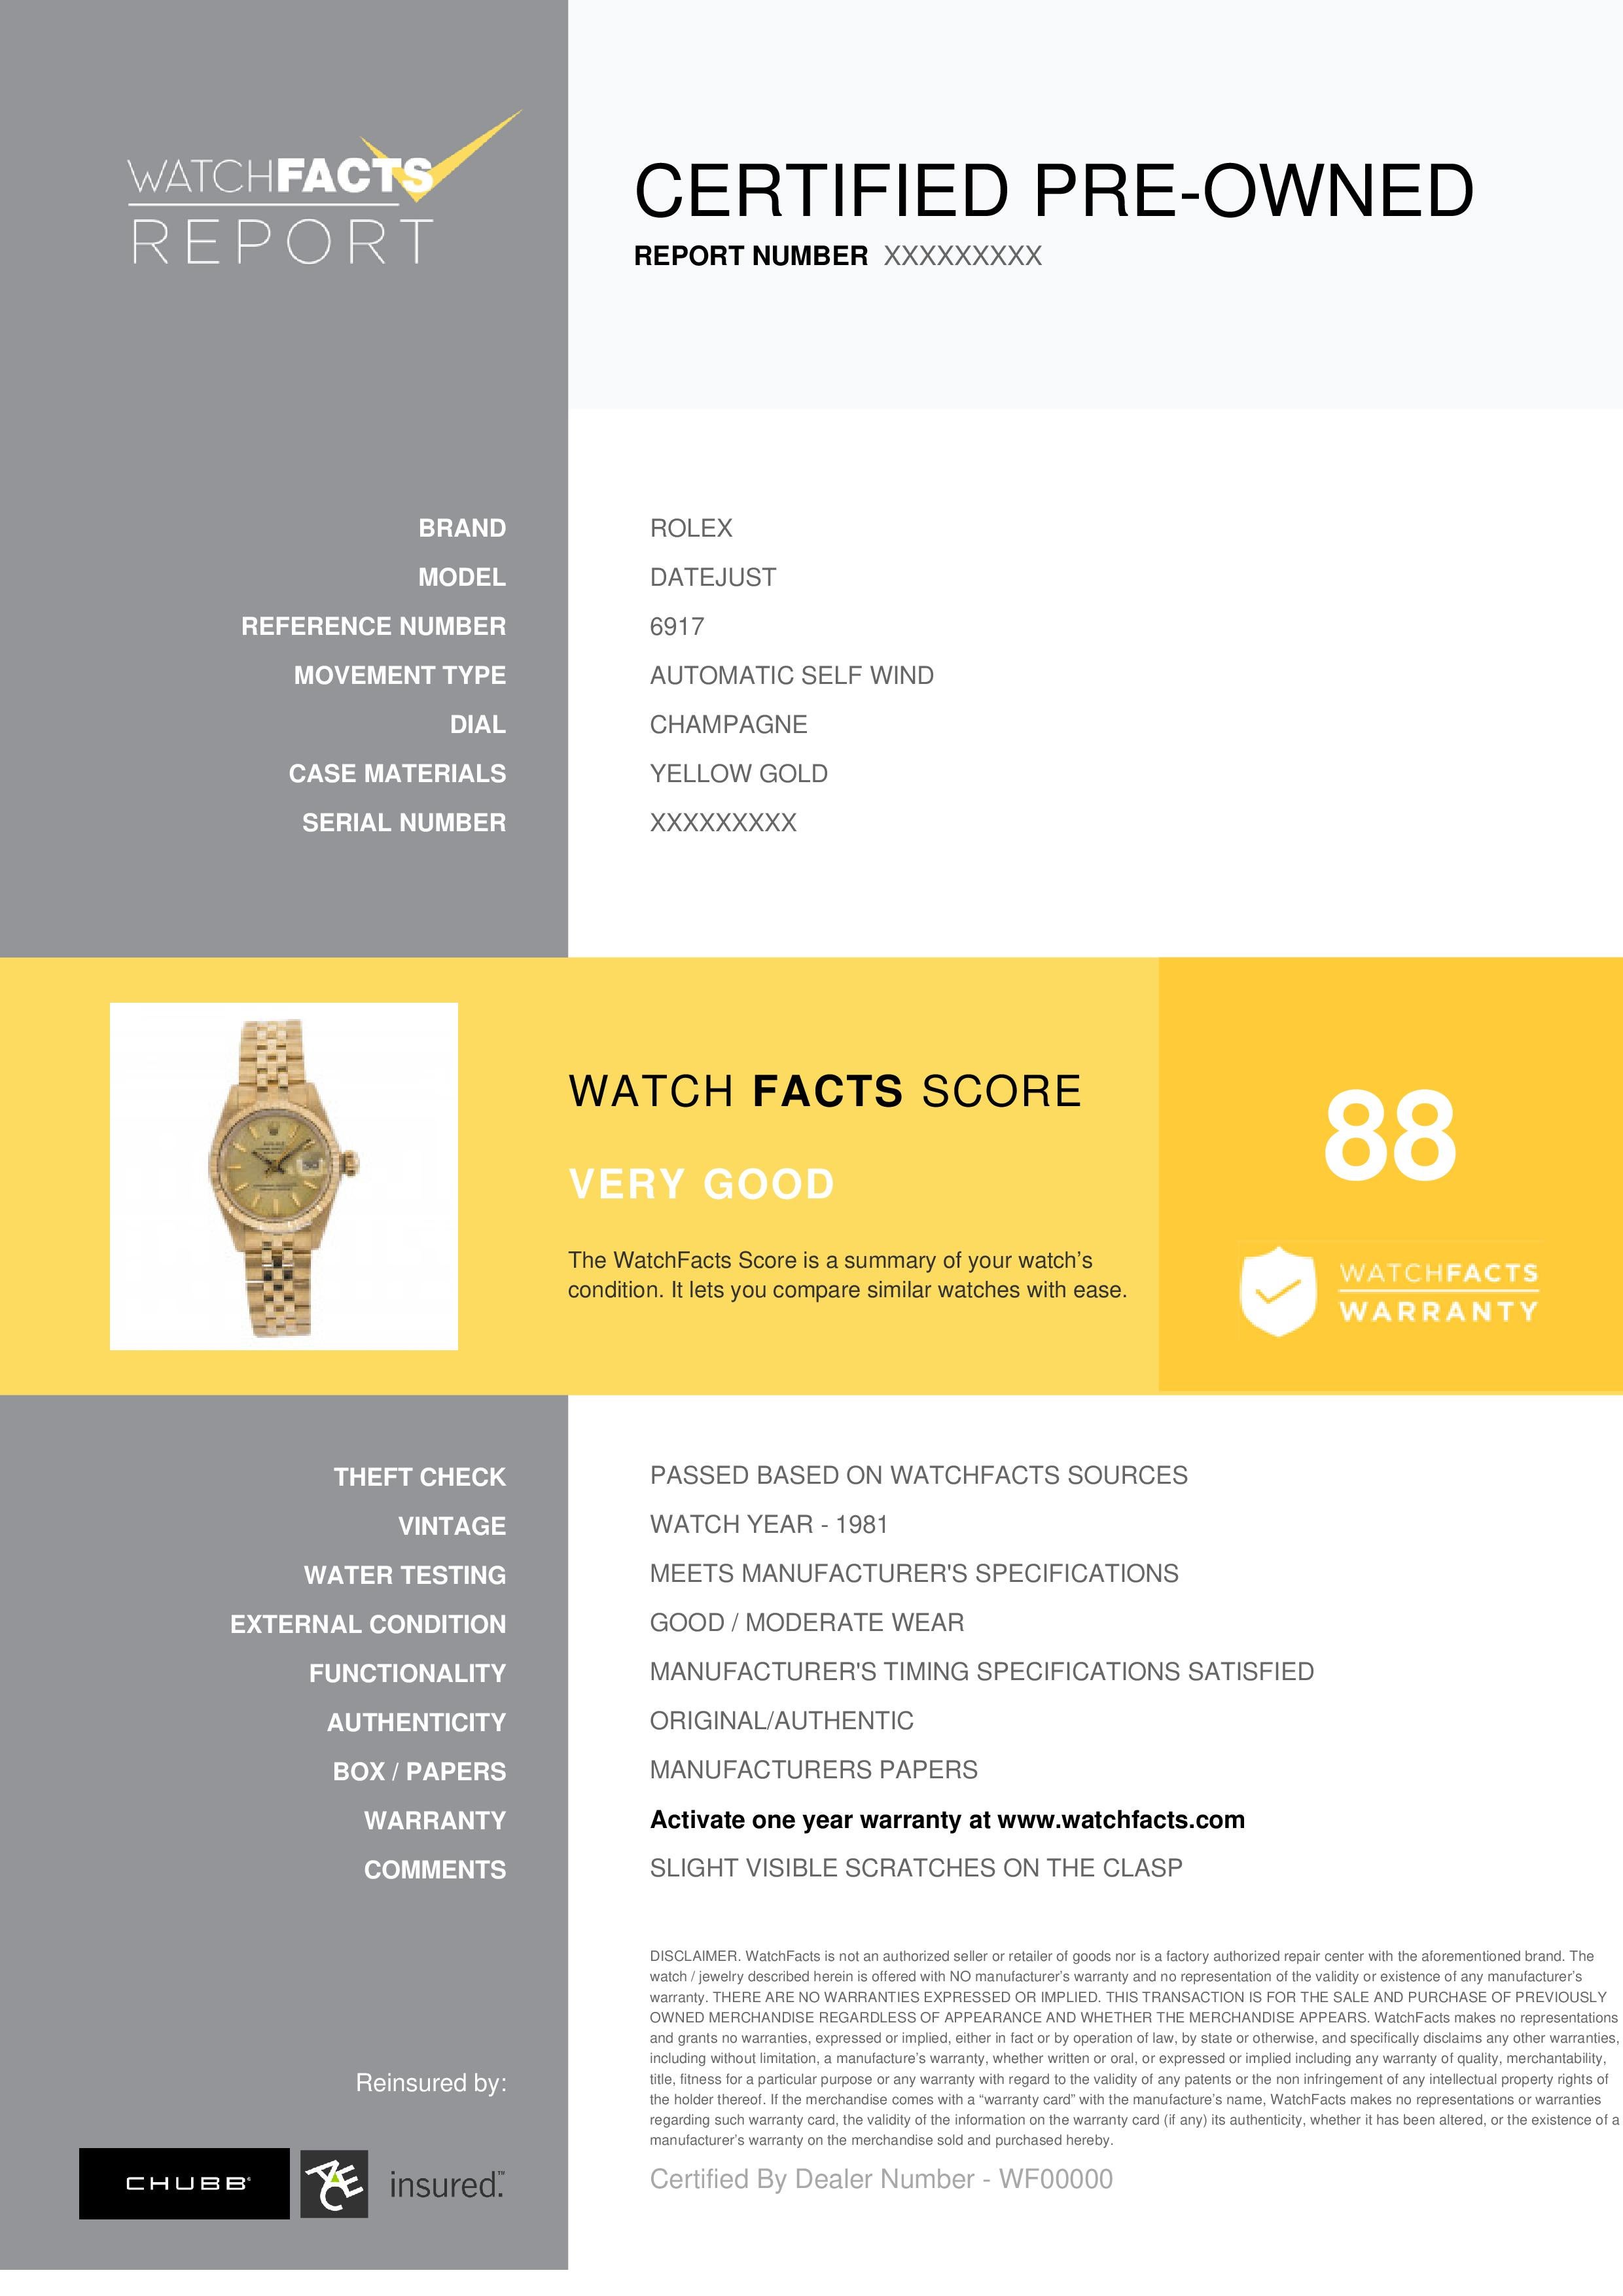 Rolex Datejust Reference #: 6917. Womens Automatic Self Wind Watch Yellow Gold Champagne 26 MM. Verified and Certified by WatchFacts. 1 year warranty offered by WatchFacts.
